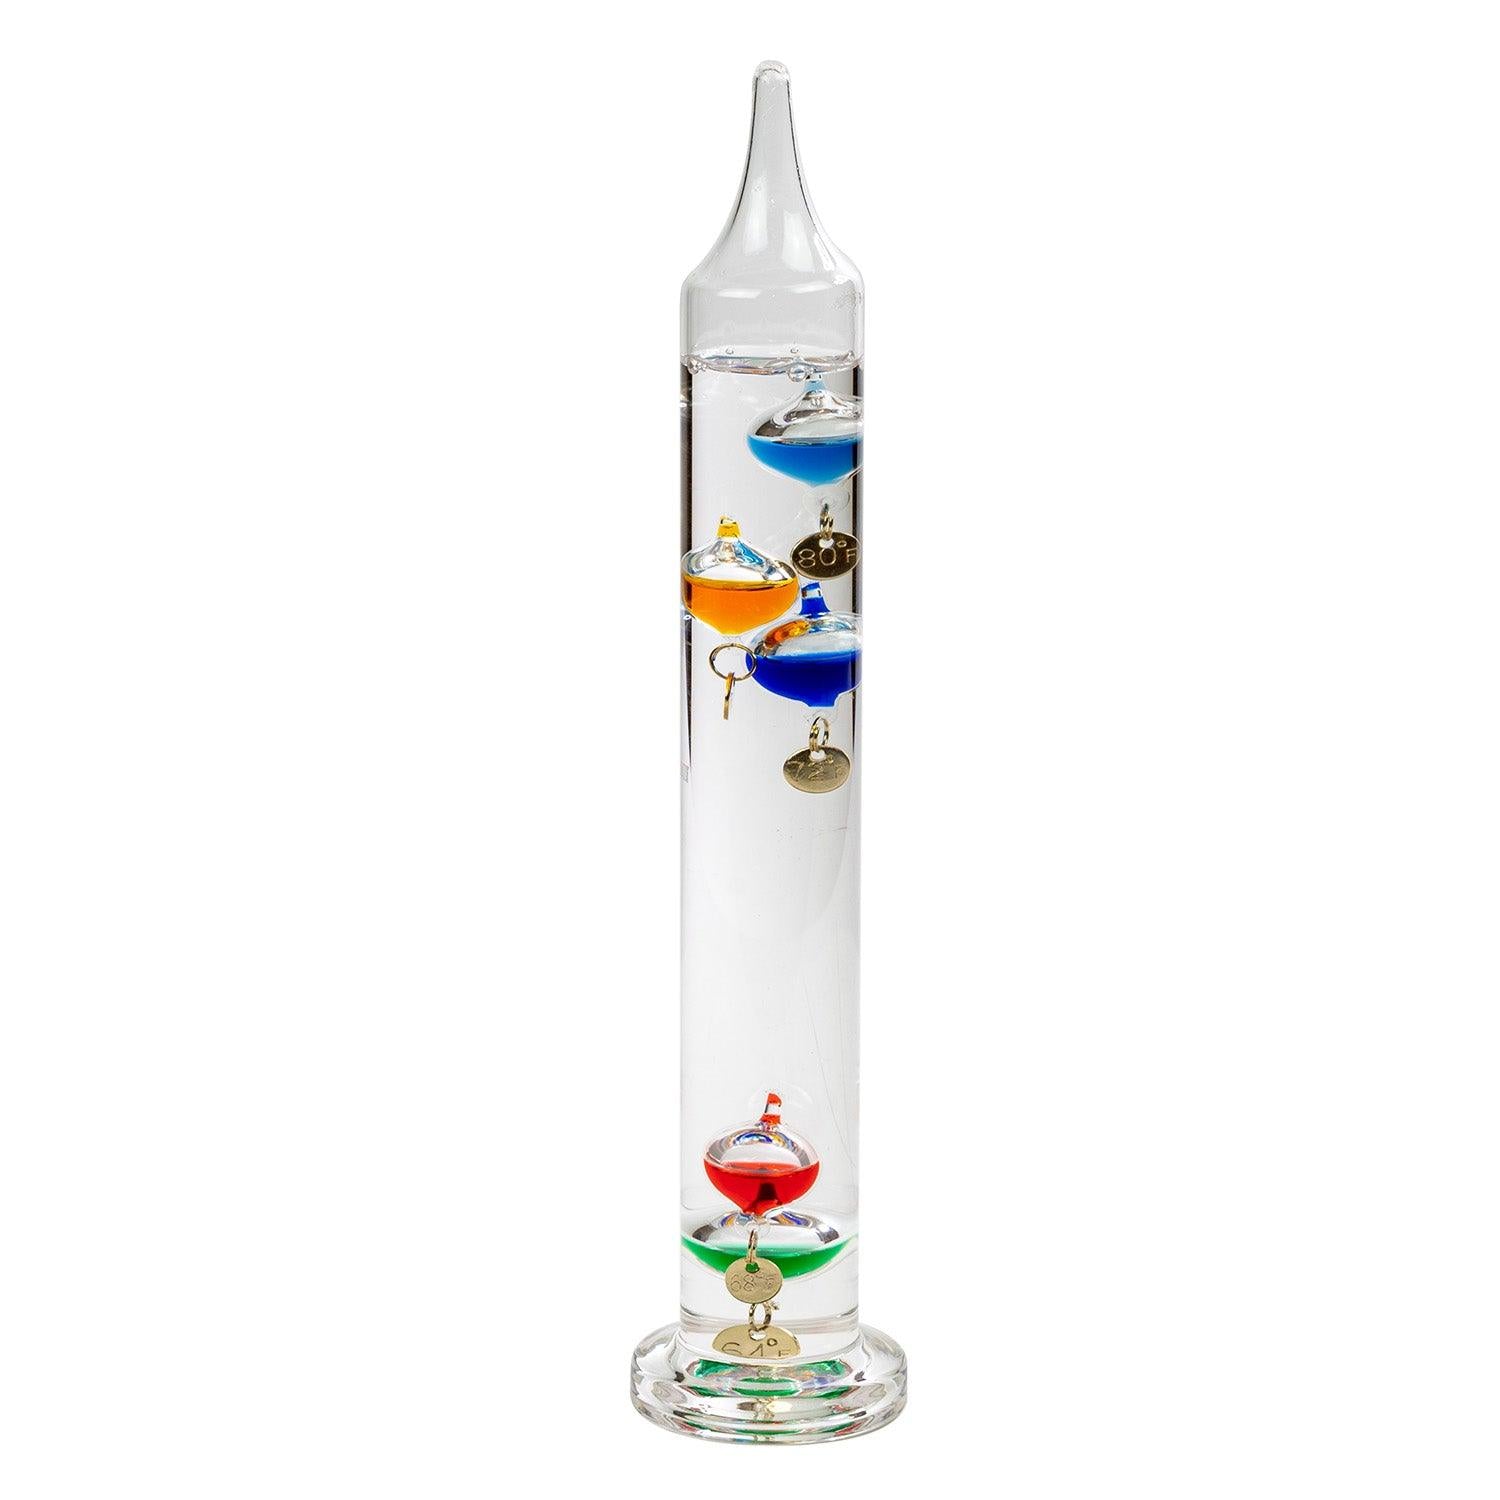 Galileo Thermometer - Kinetic Mobiles - Science Museum Shop